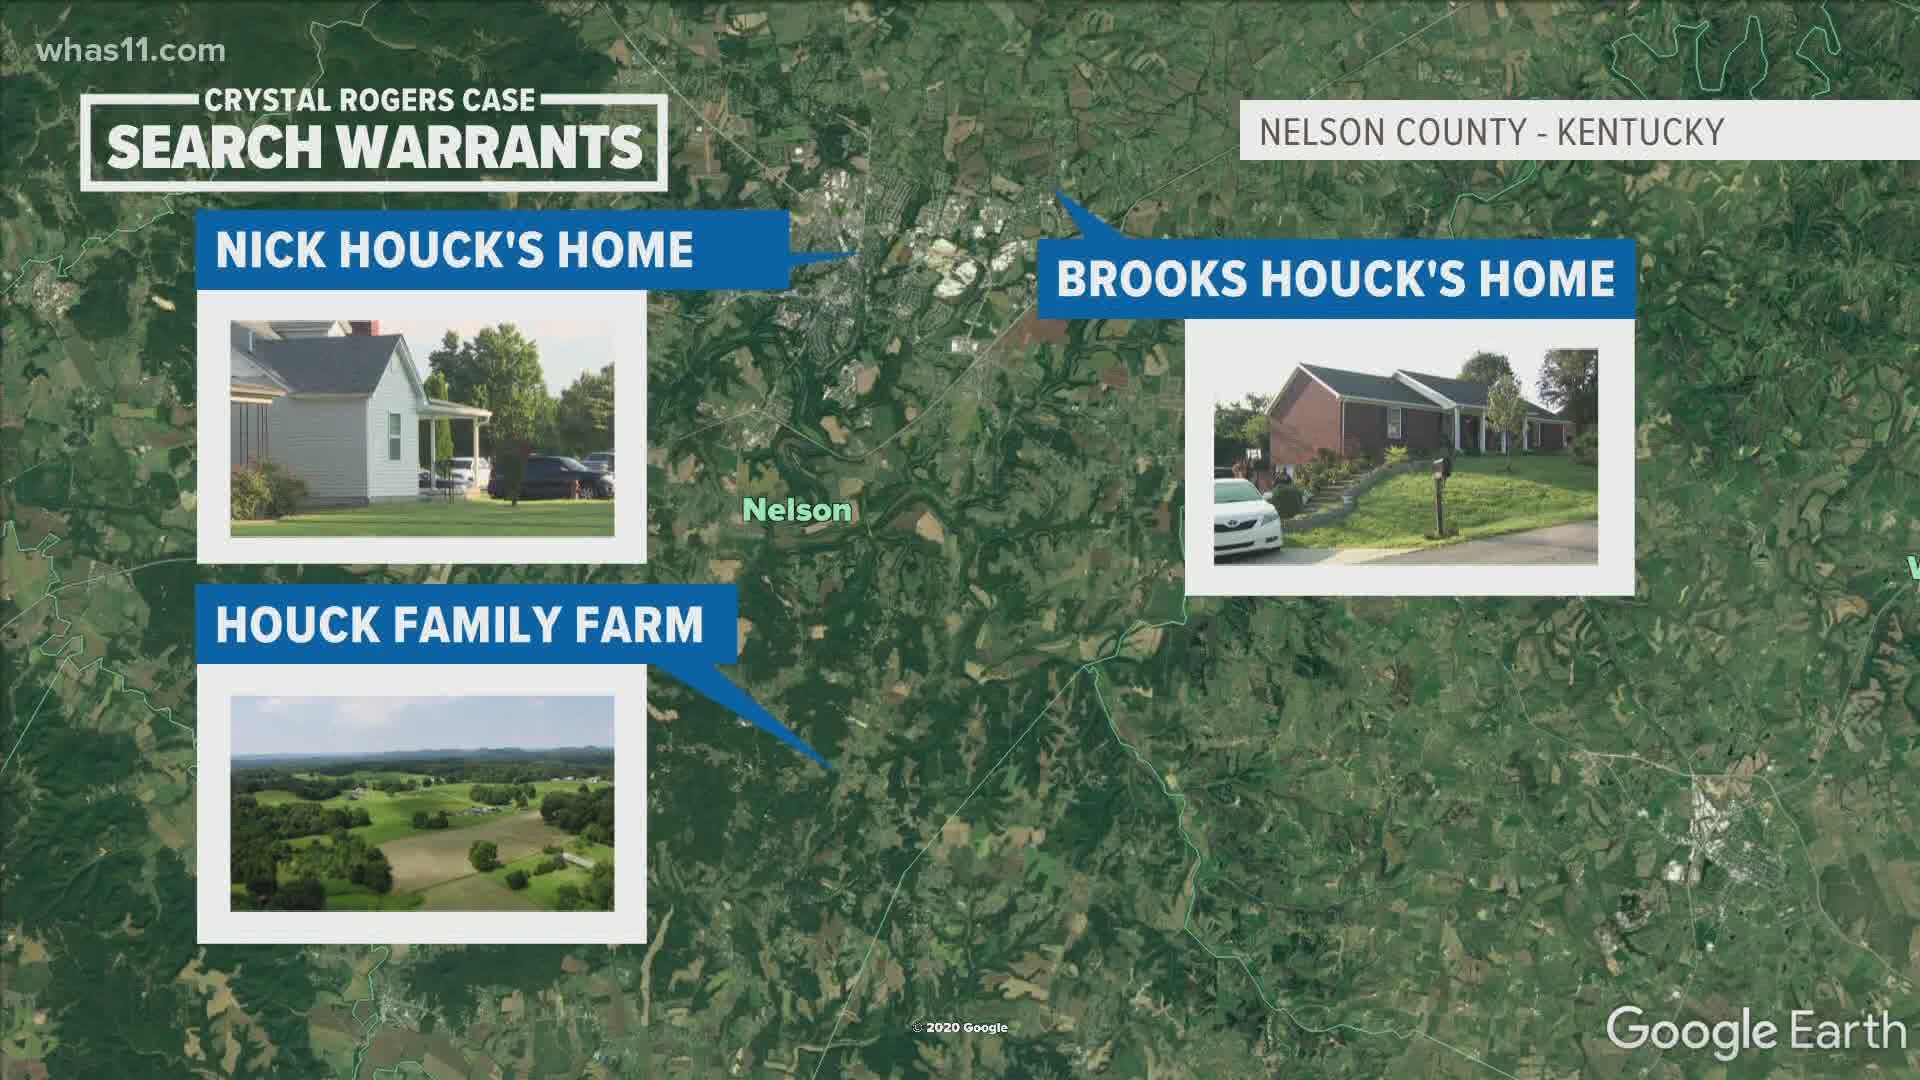 Remains were found just a few miles away from the Houck family farm where Crystal Rogers was last seen.